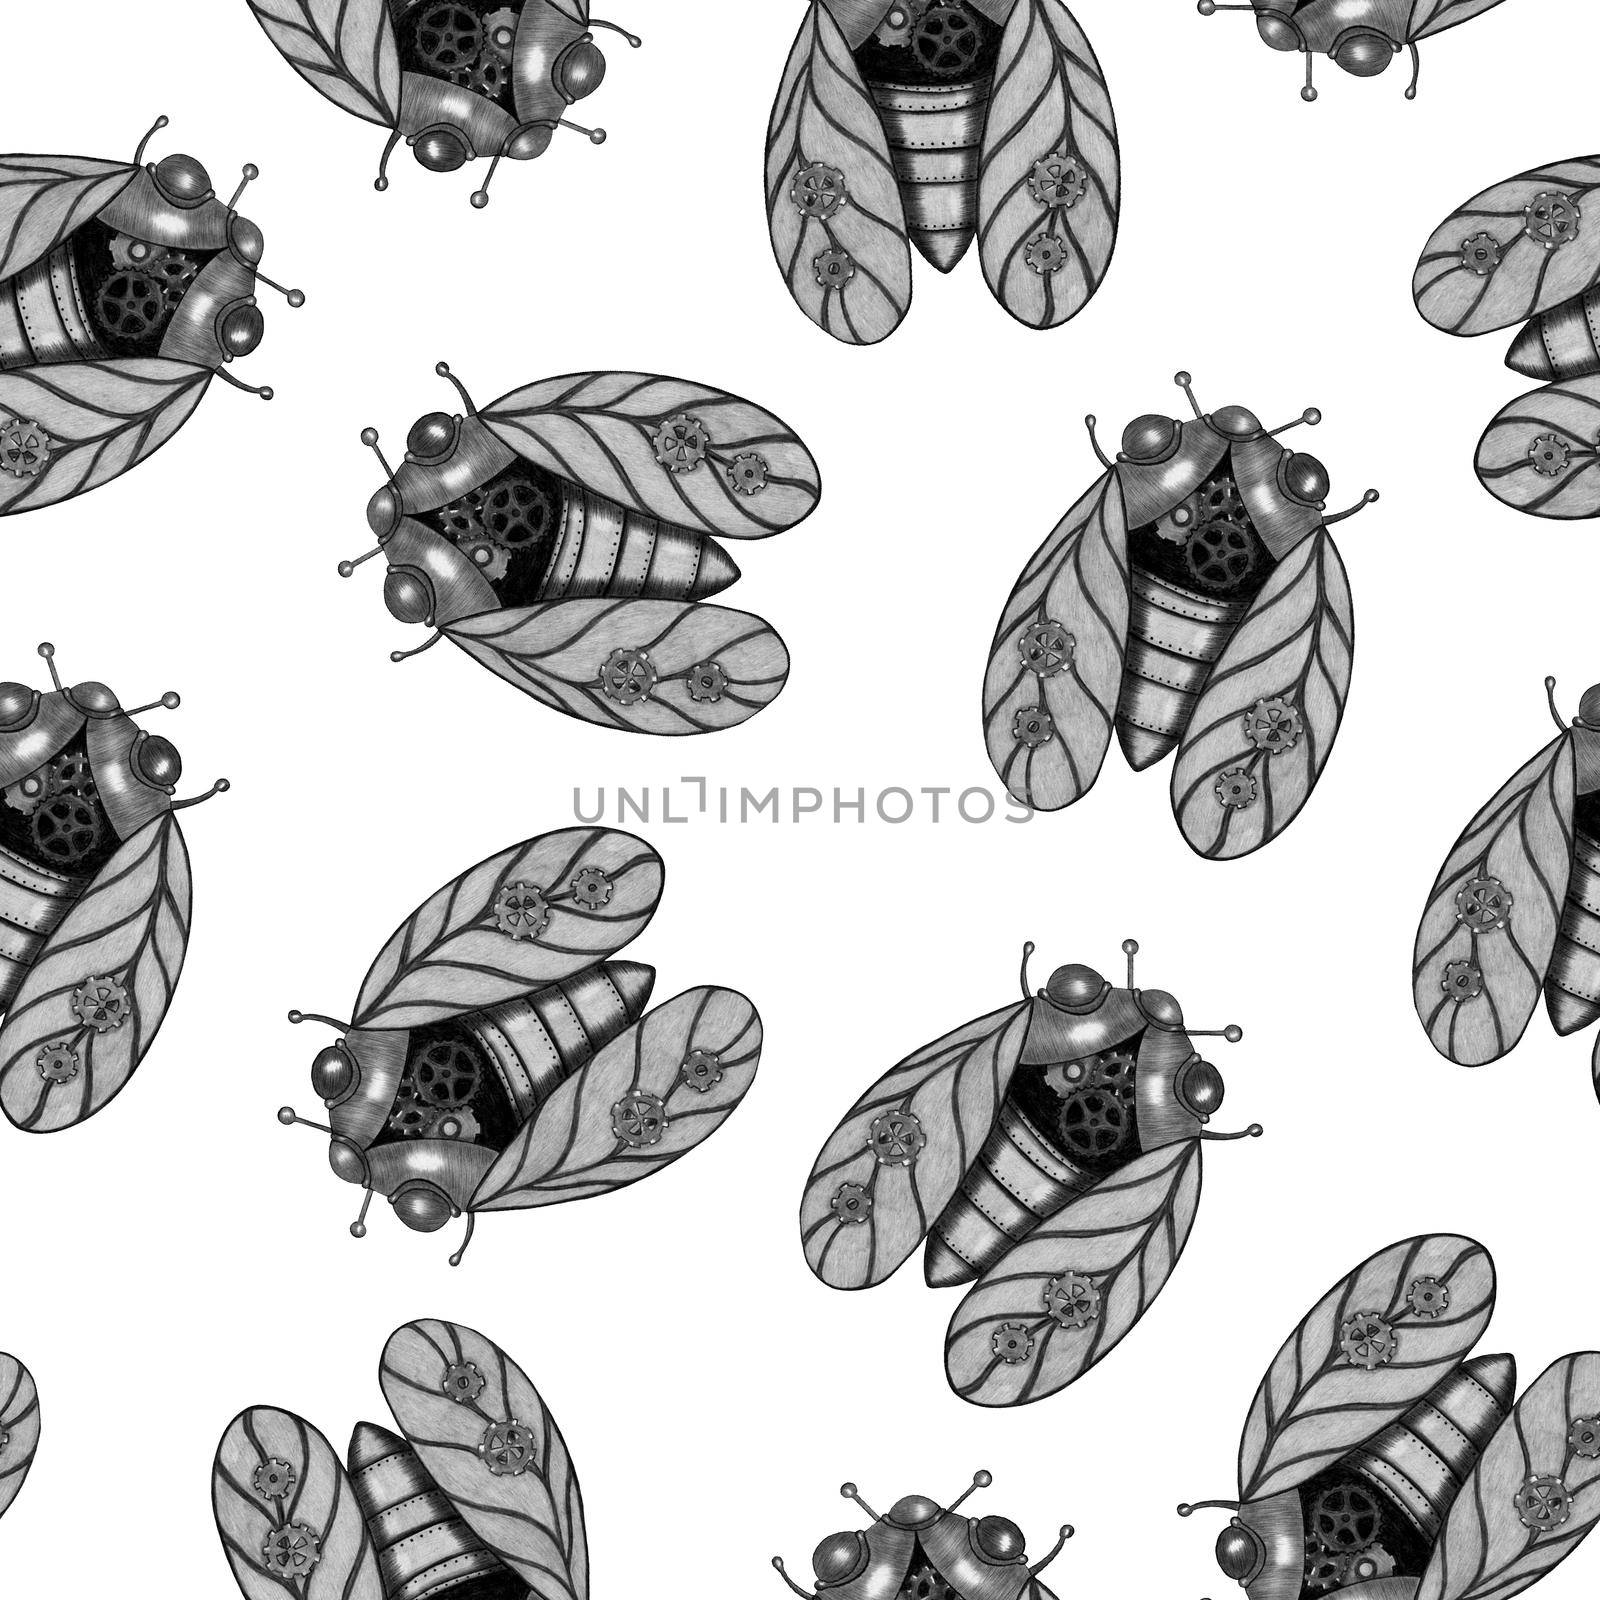 Hand-Drawn Steampunk Cicada Seamless Pattern on White Background. Digital Paper with Cicada Illustration Drawn by Colored Pencil.